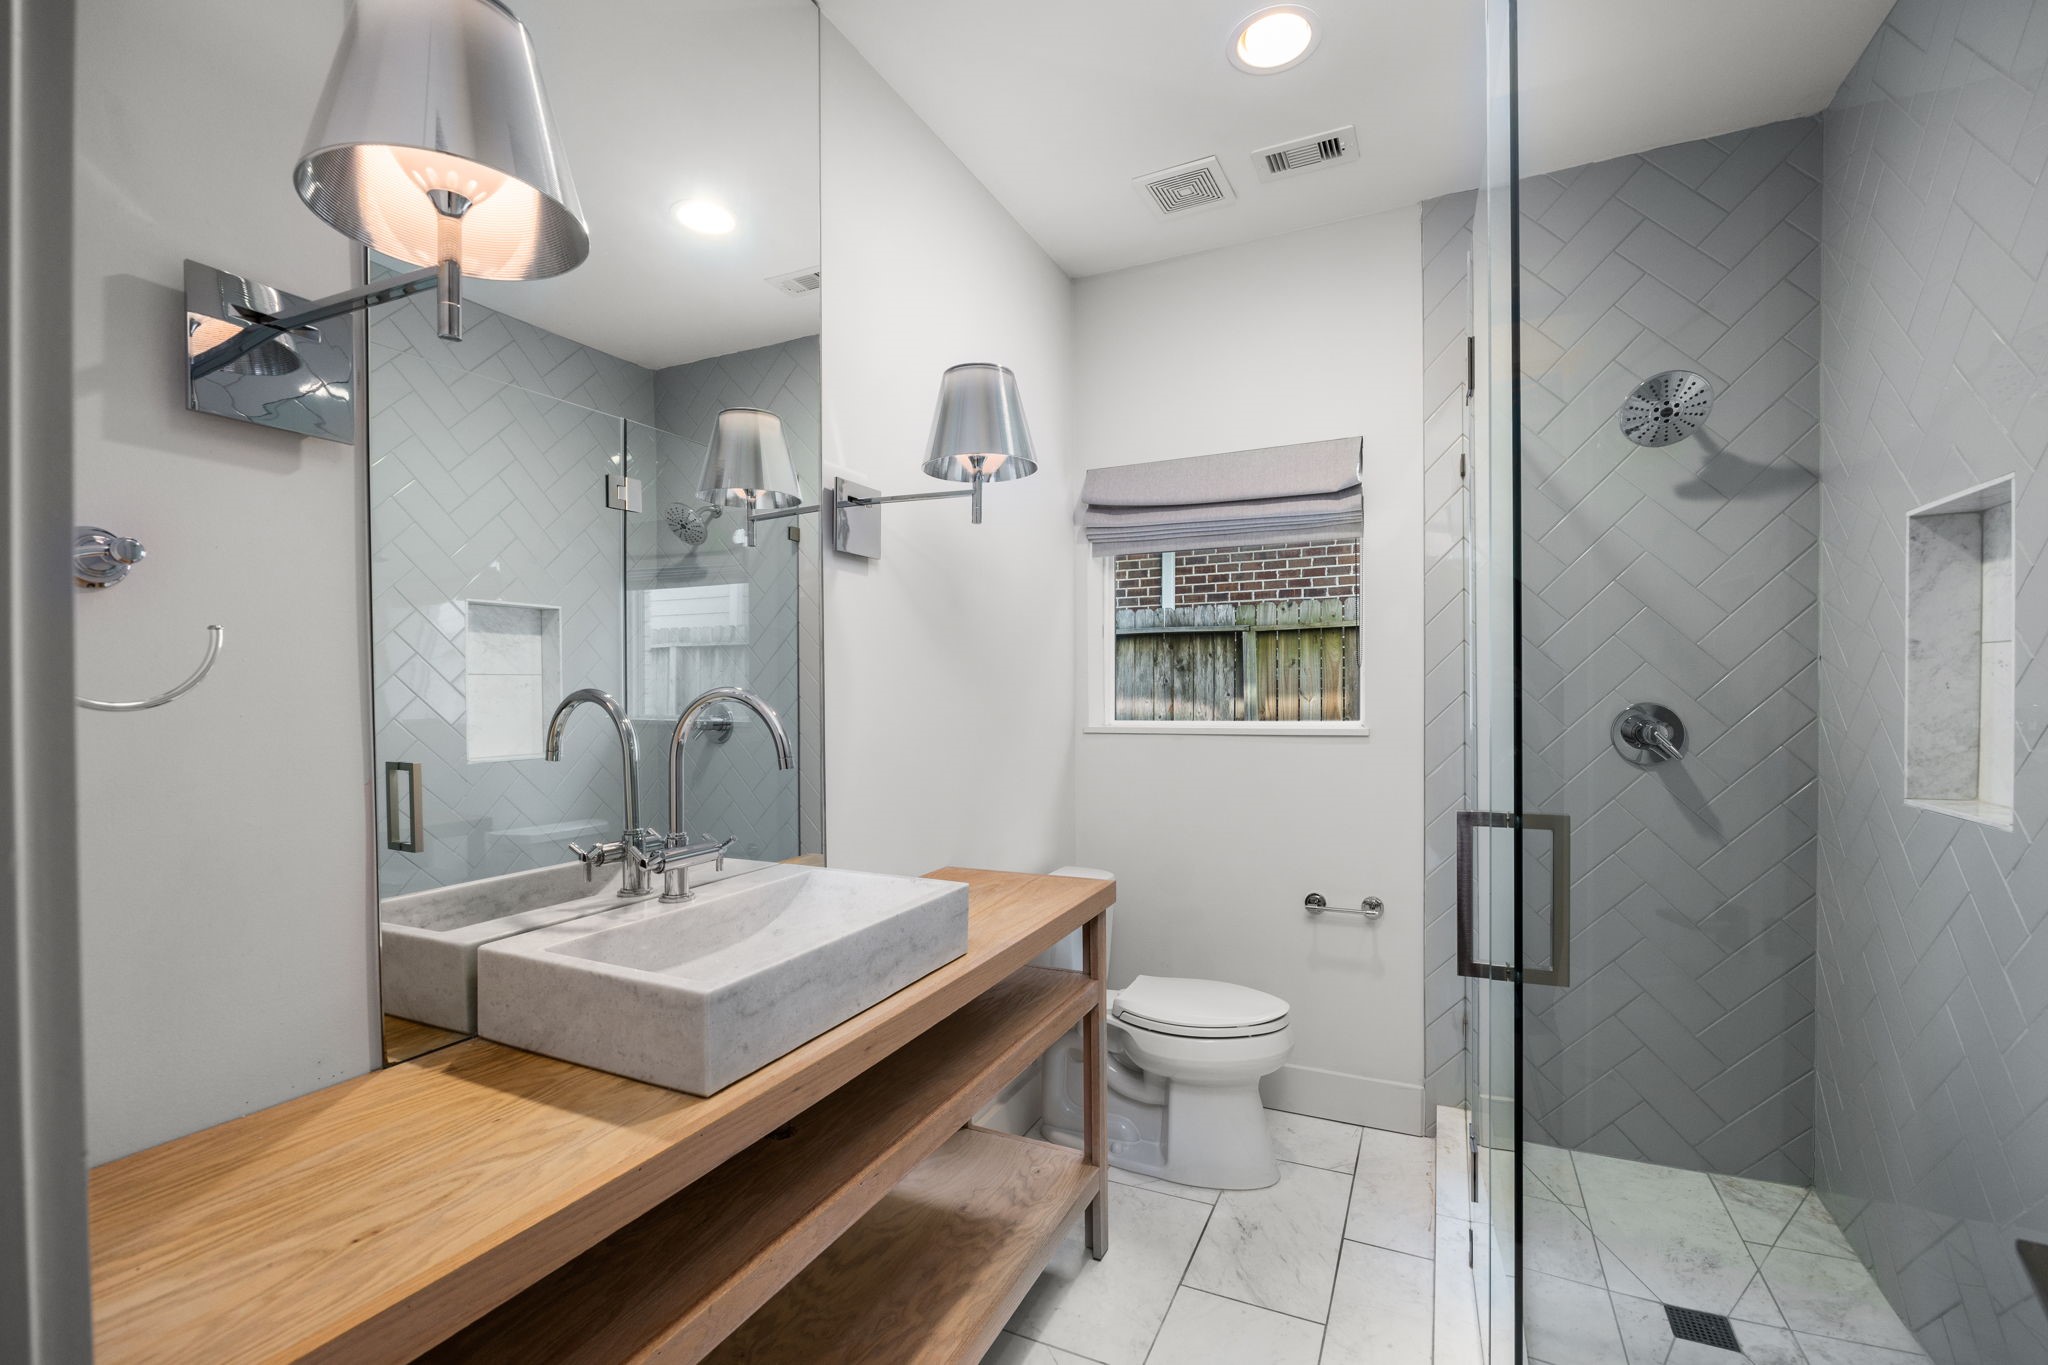 Full bathroom downstairs with gorgeous upgrades.